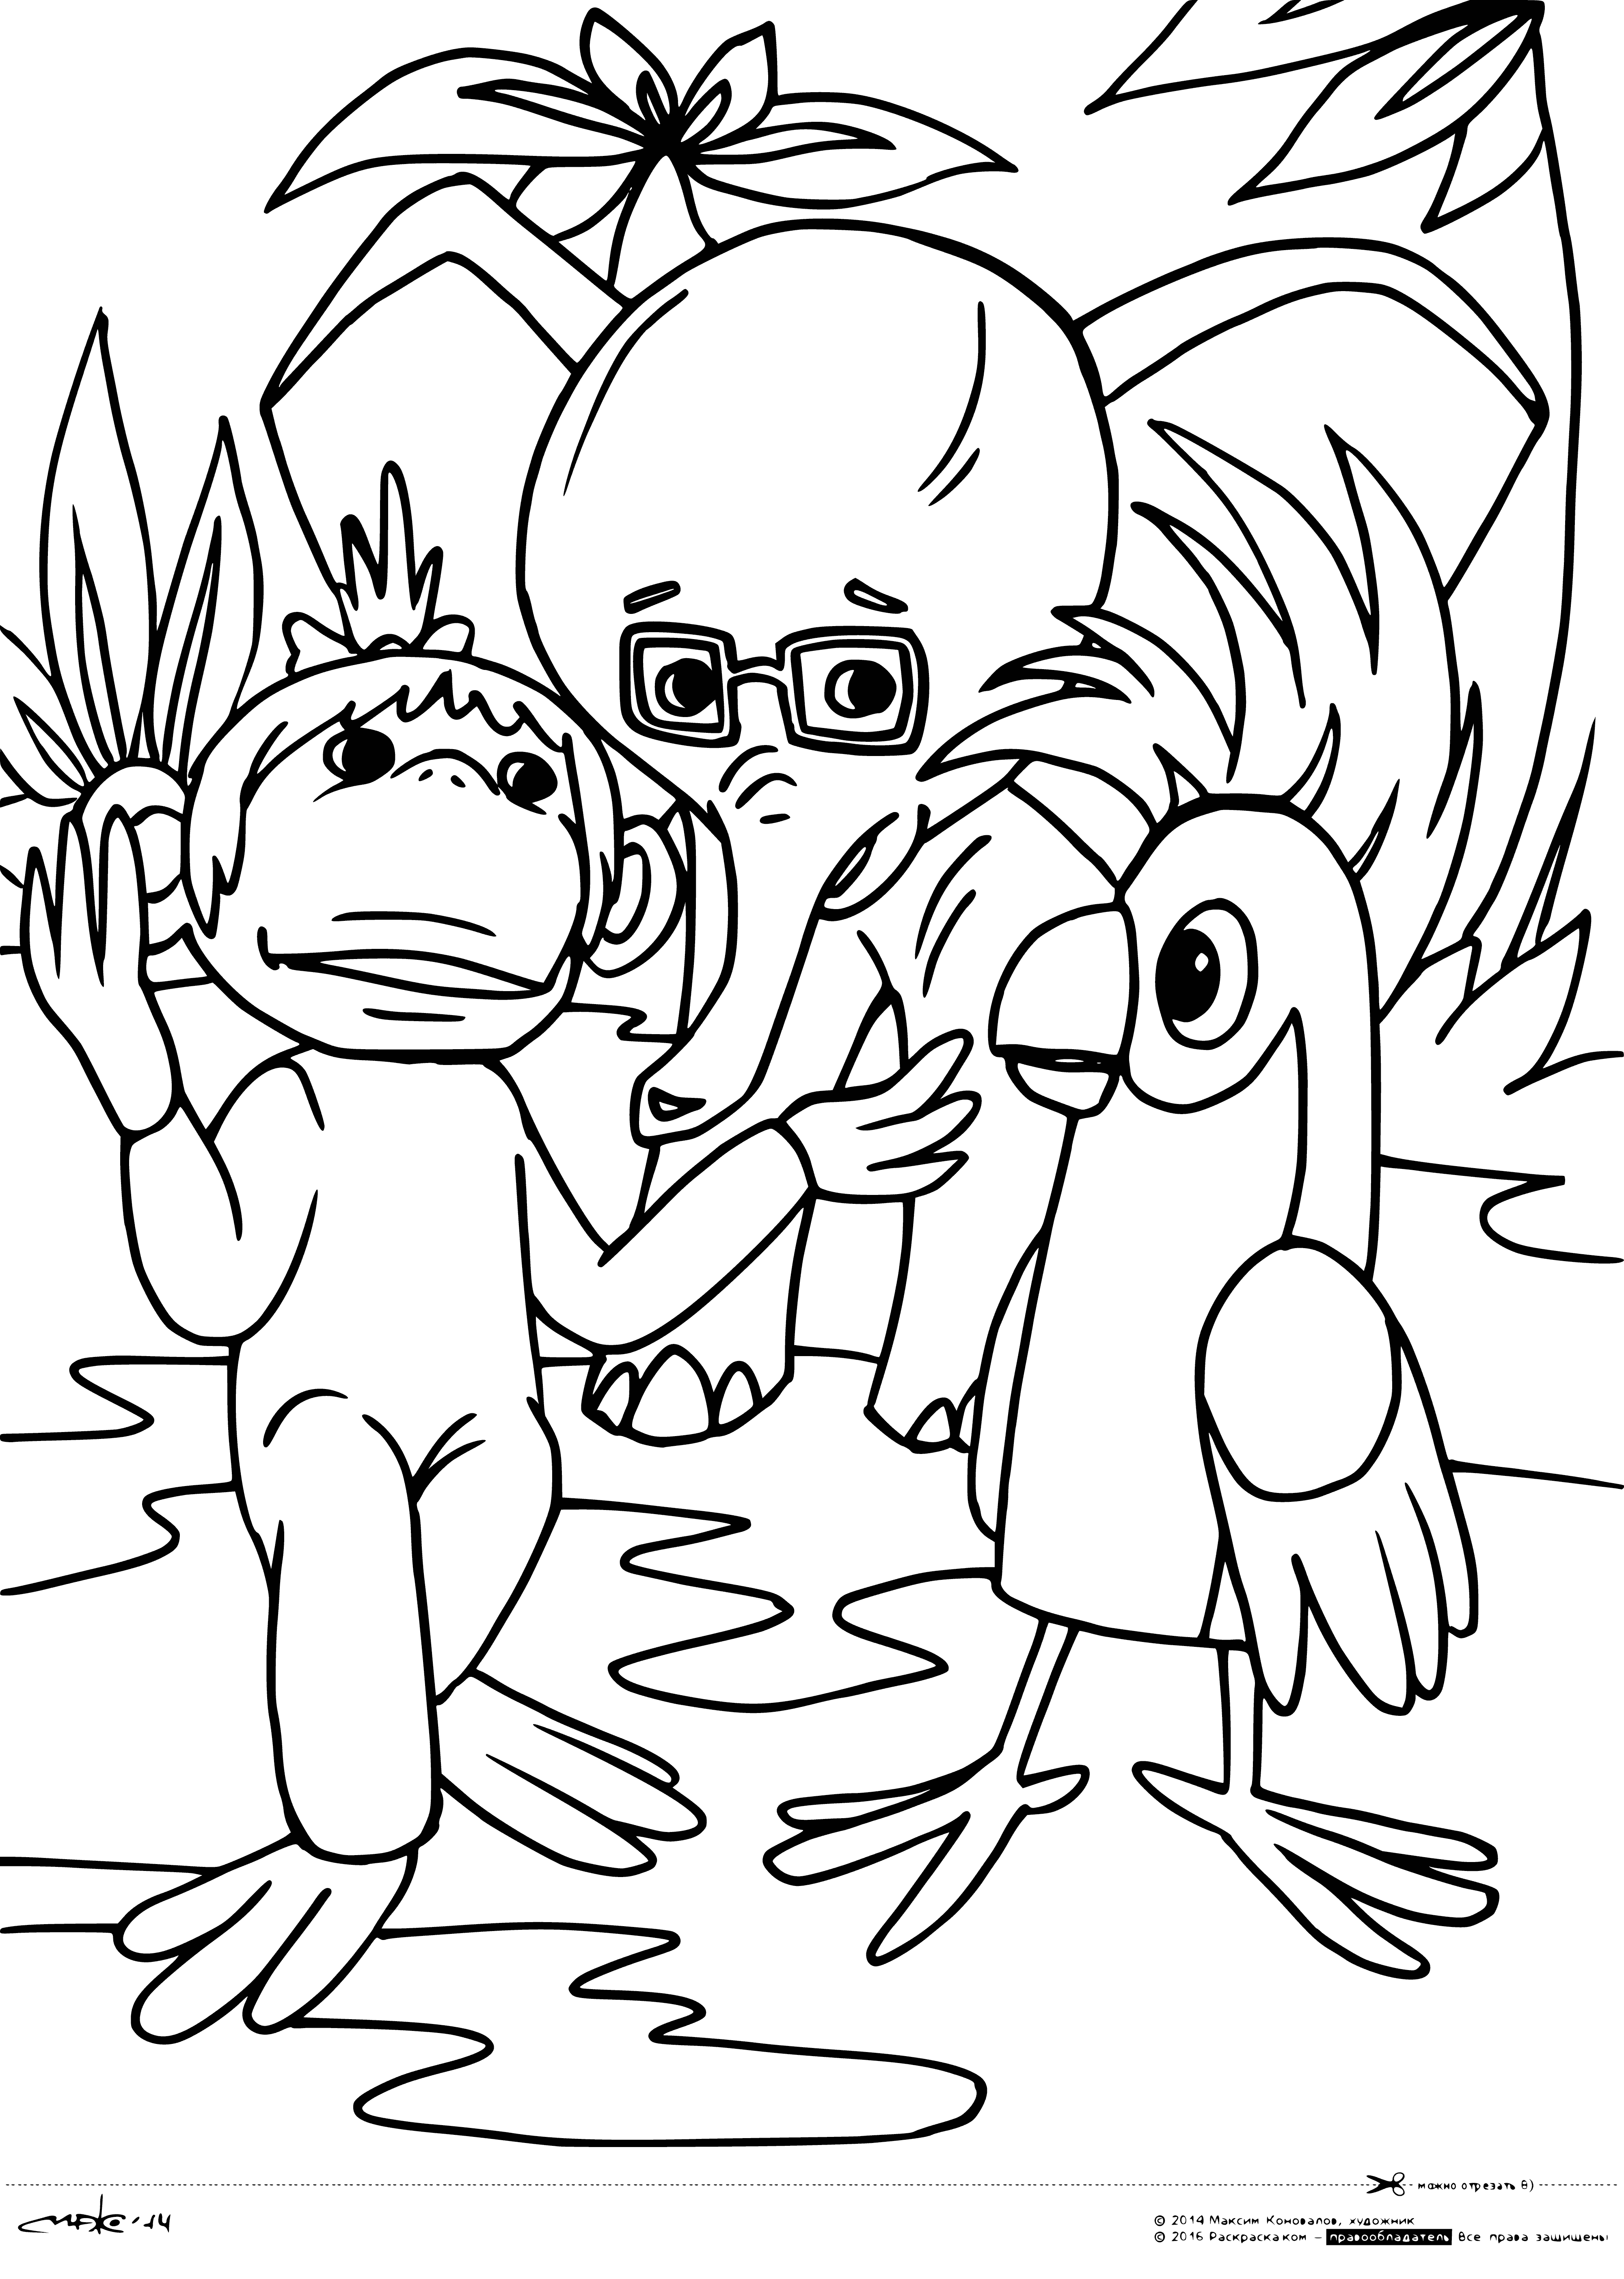 coloring page: 38 parrots, monkey, baby elephant; monkey on head, parrots flying around them.